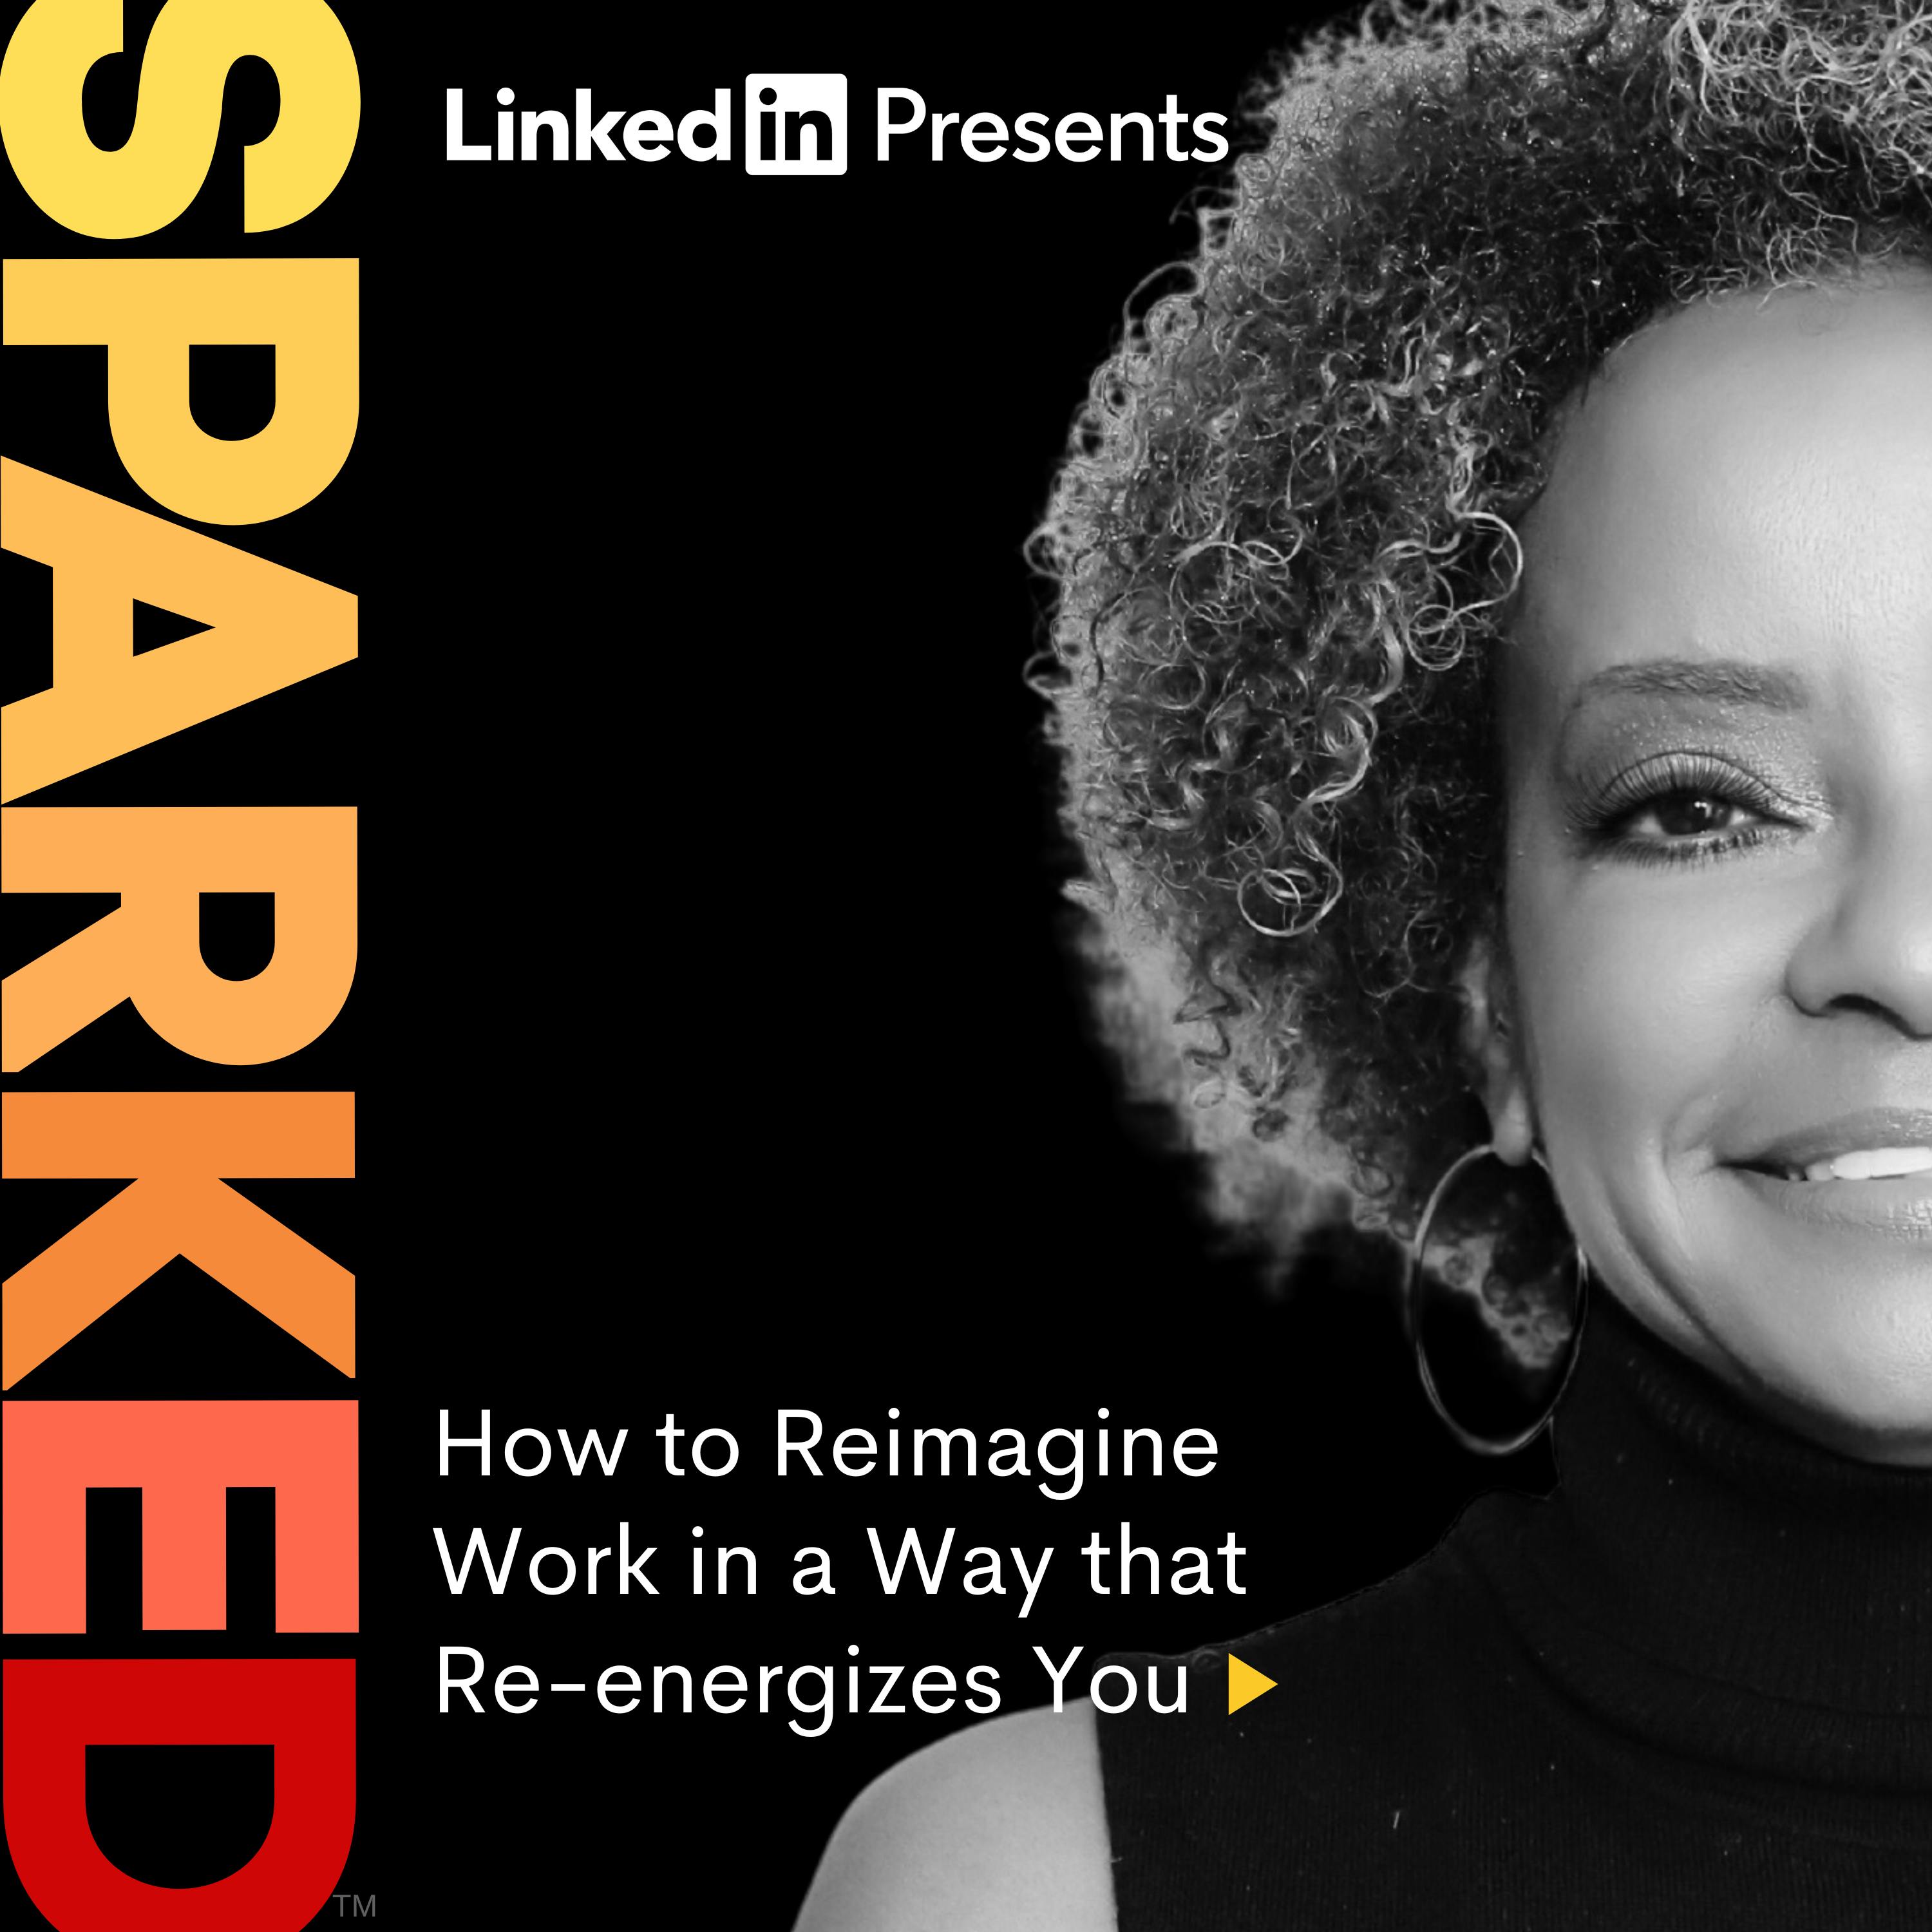 How to Reimagine Work in a Way that Re-energizes You Image